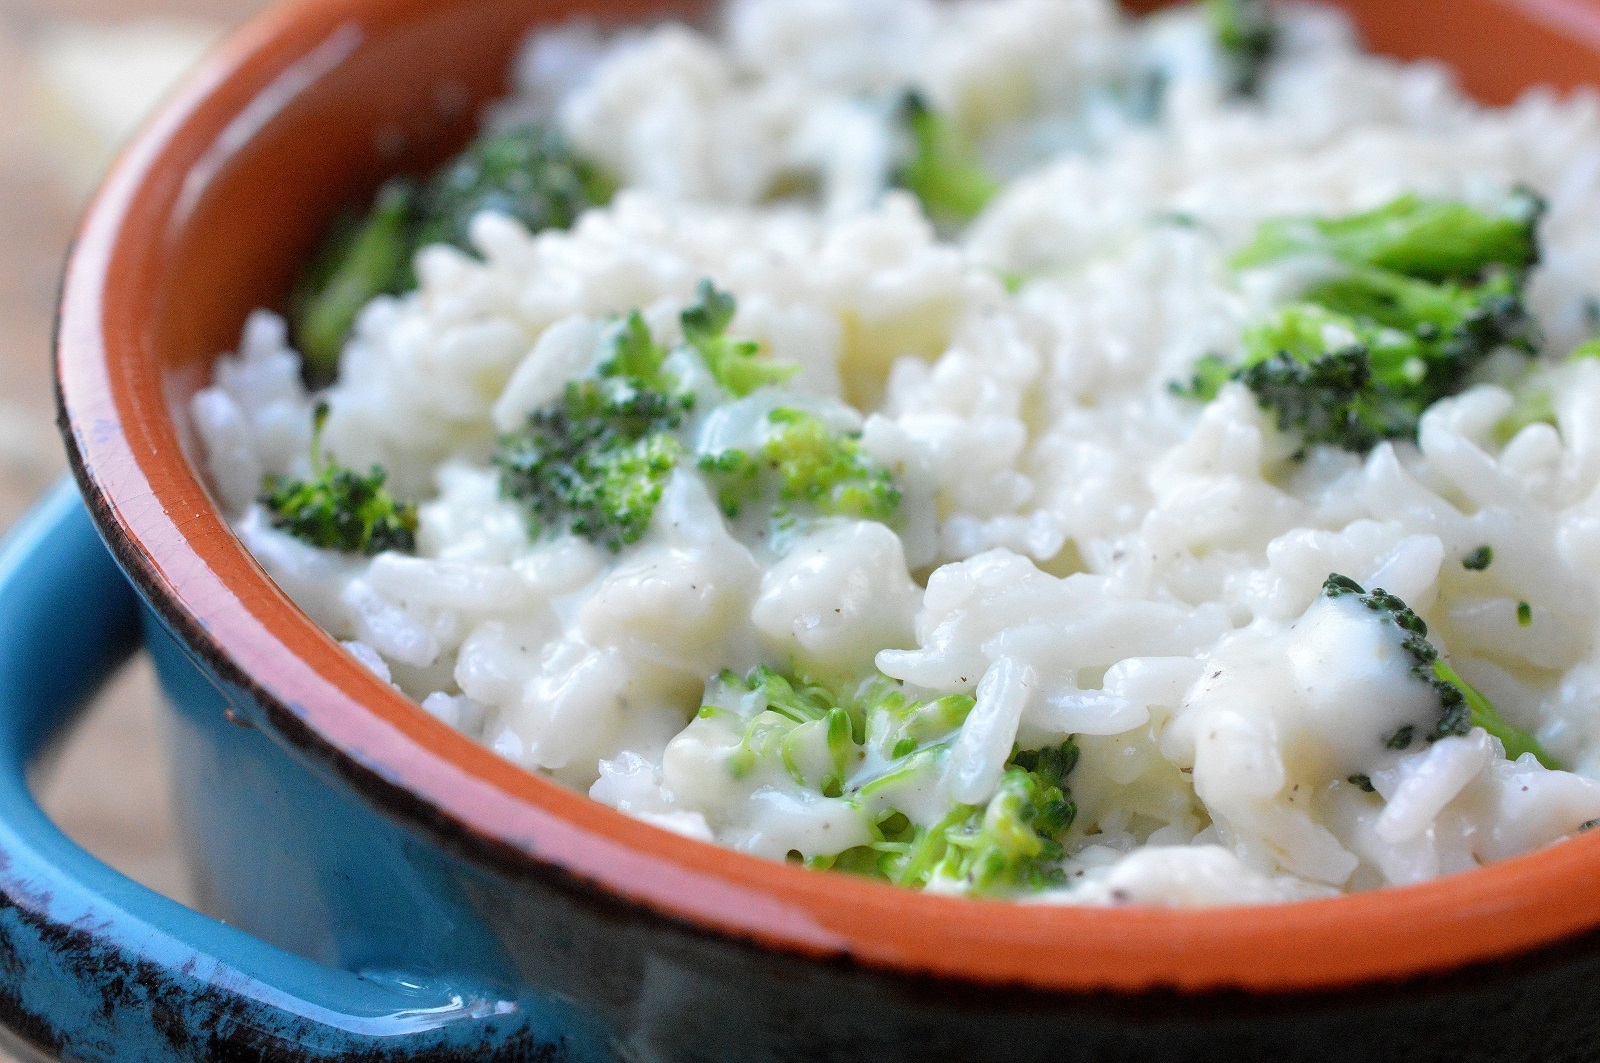 Cheesy Broccoli Rice made in under 20 minutes with white cheddar cheese